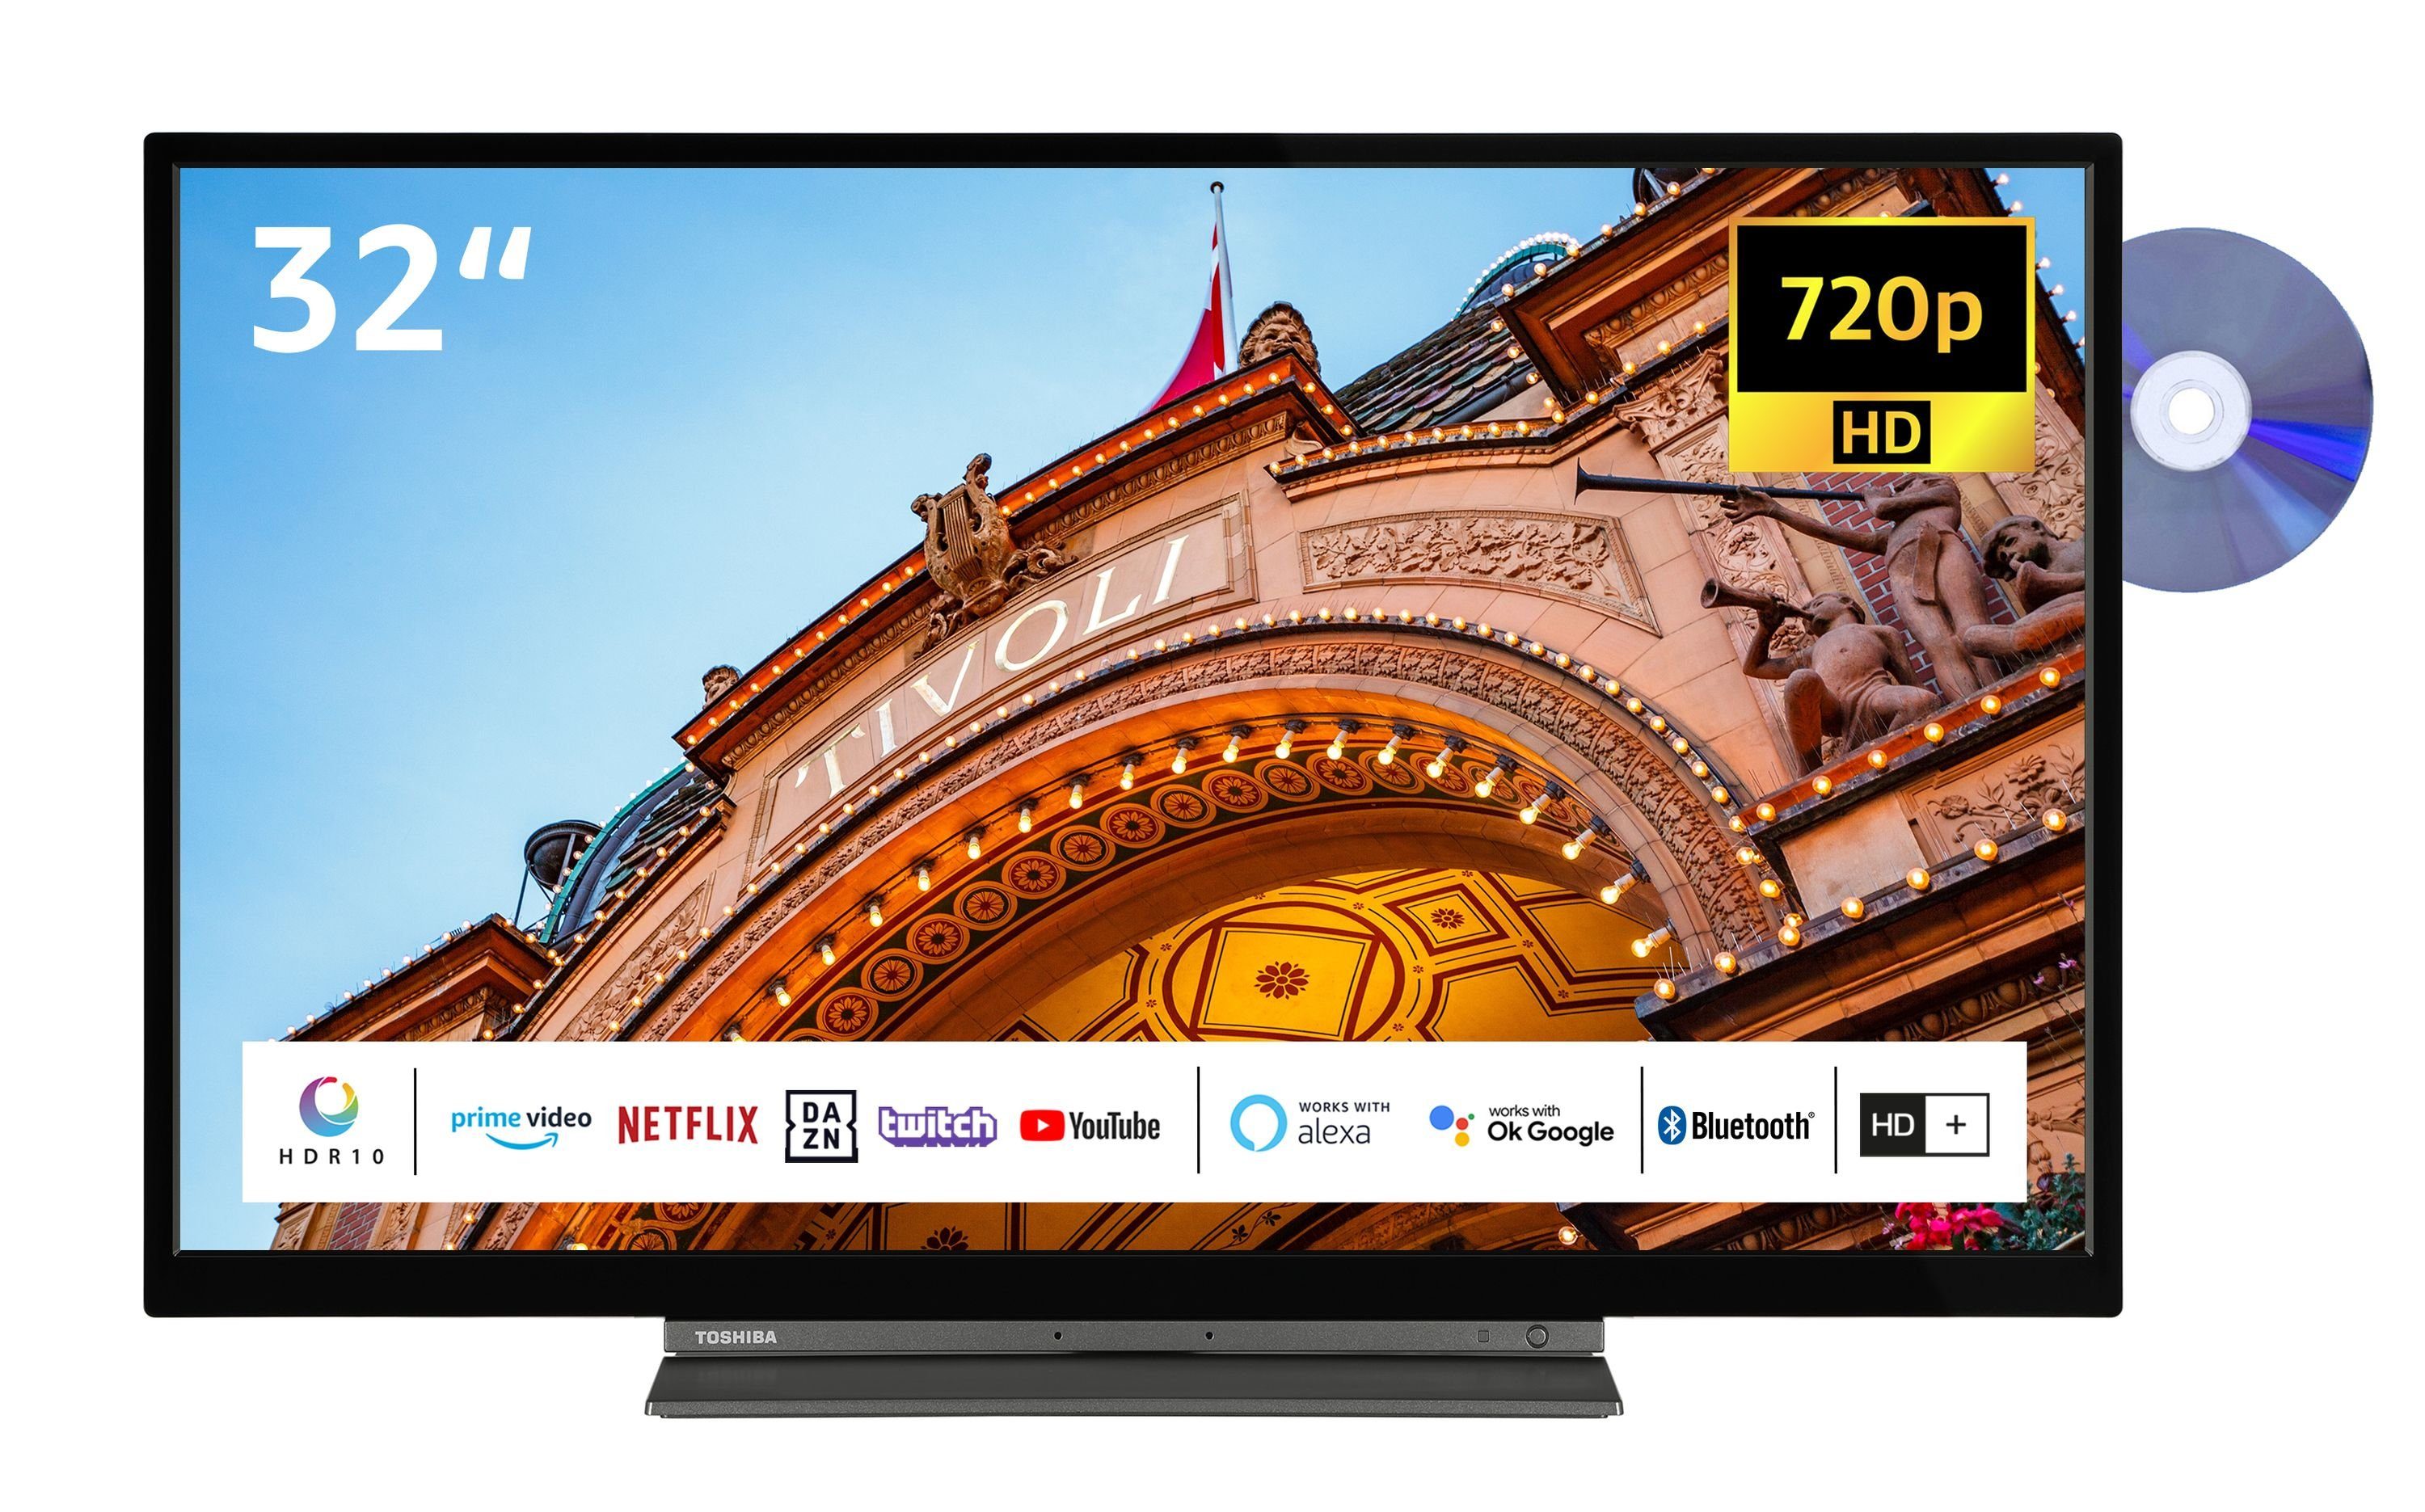 inklusive) HD-ready, Toshiba Monate LCD-LED Triple-Tuner, Smart HD+ TV, Fernseher 6 DVD-Player, (80 cm/32 HDR, Zoll, 32WD3C63DAY/2